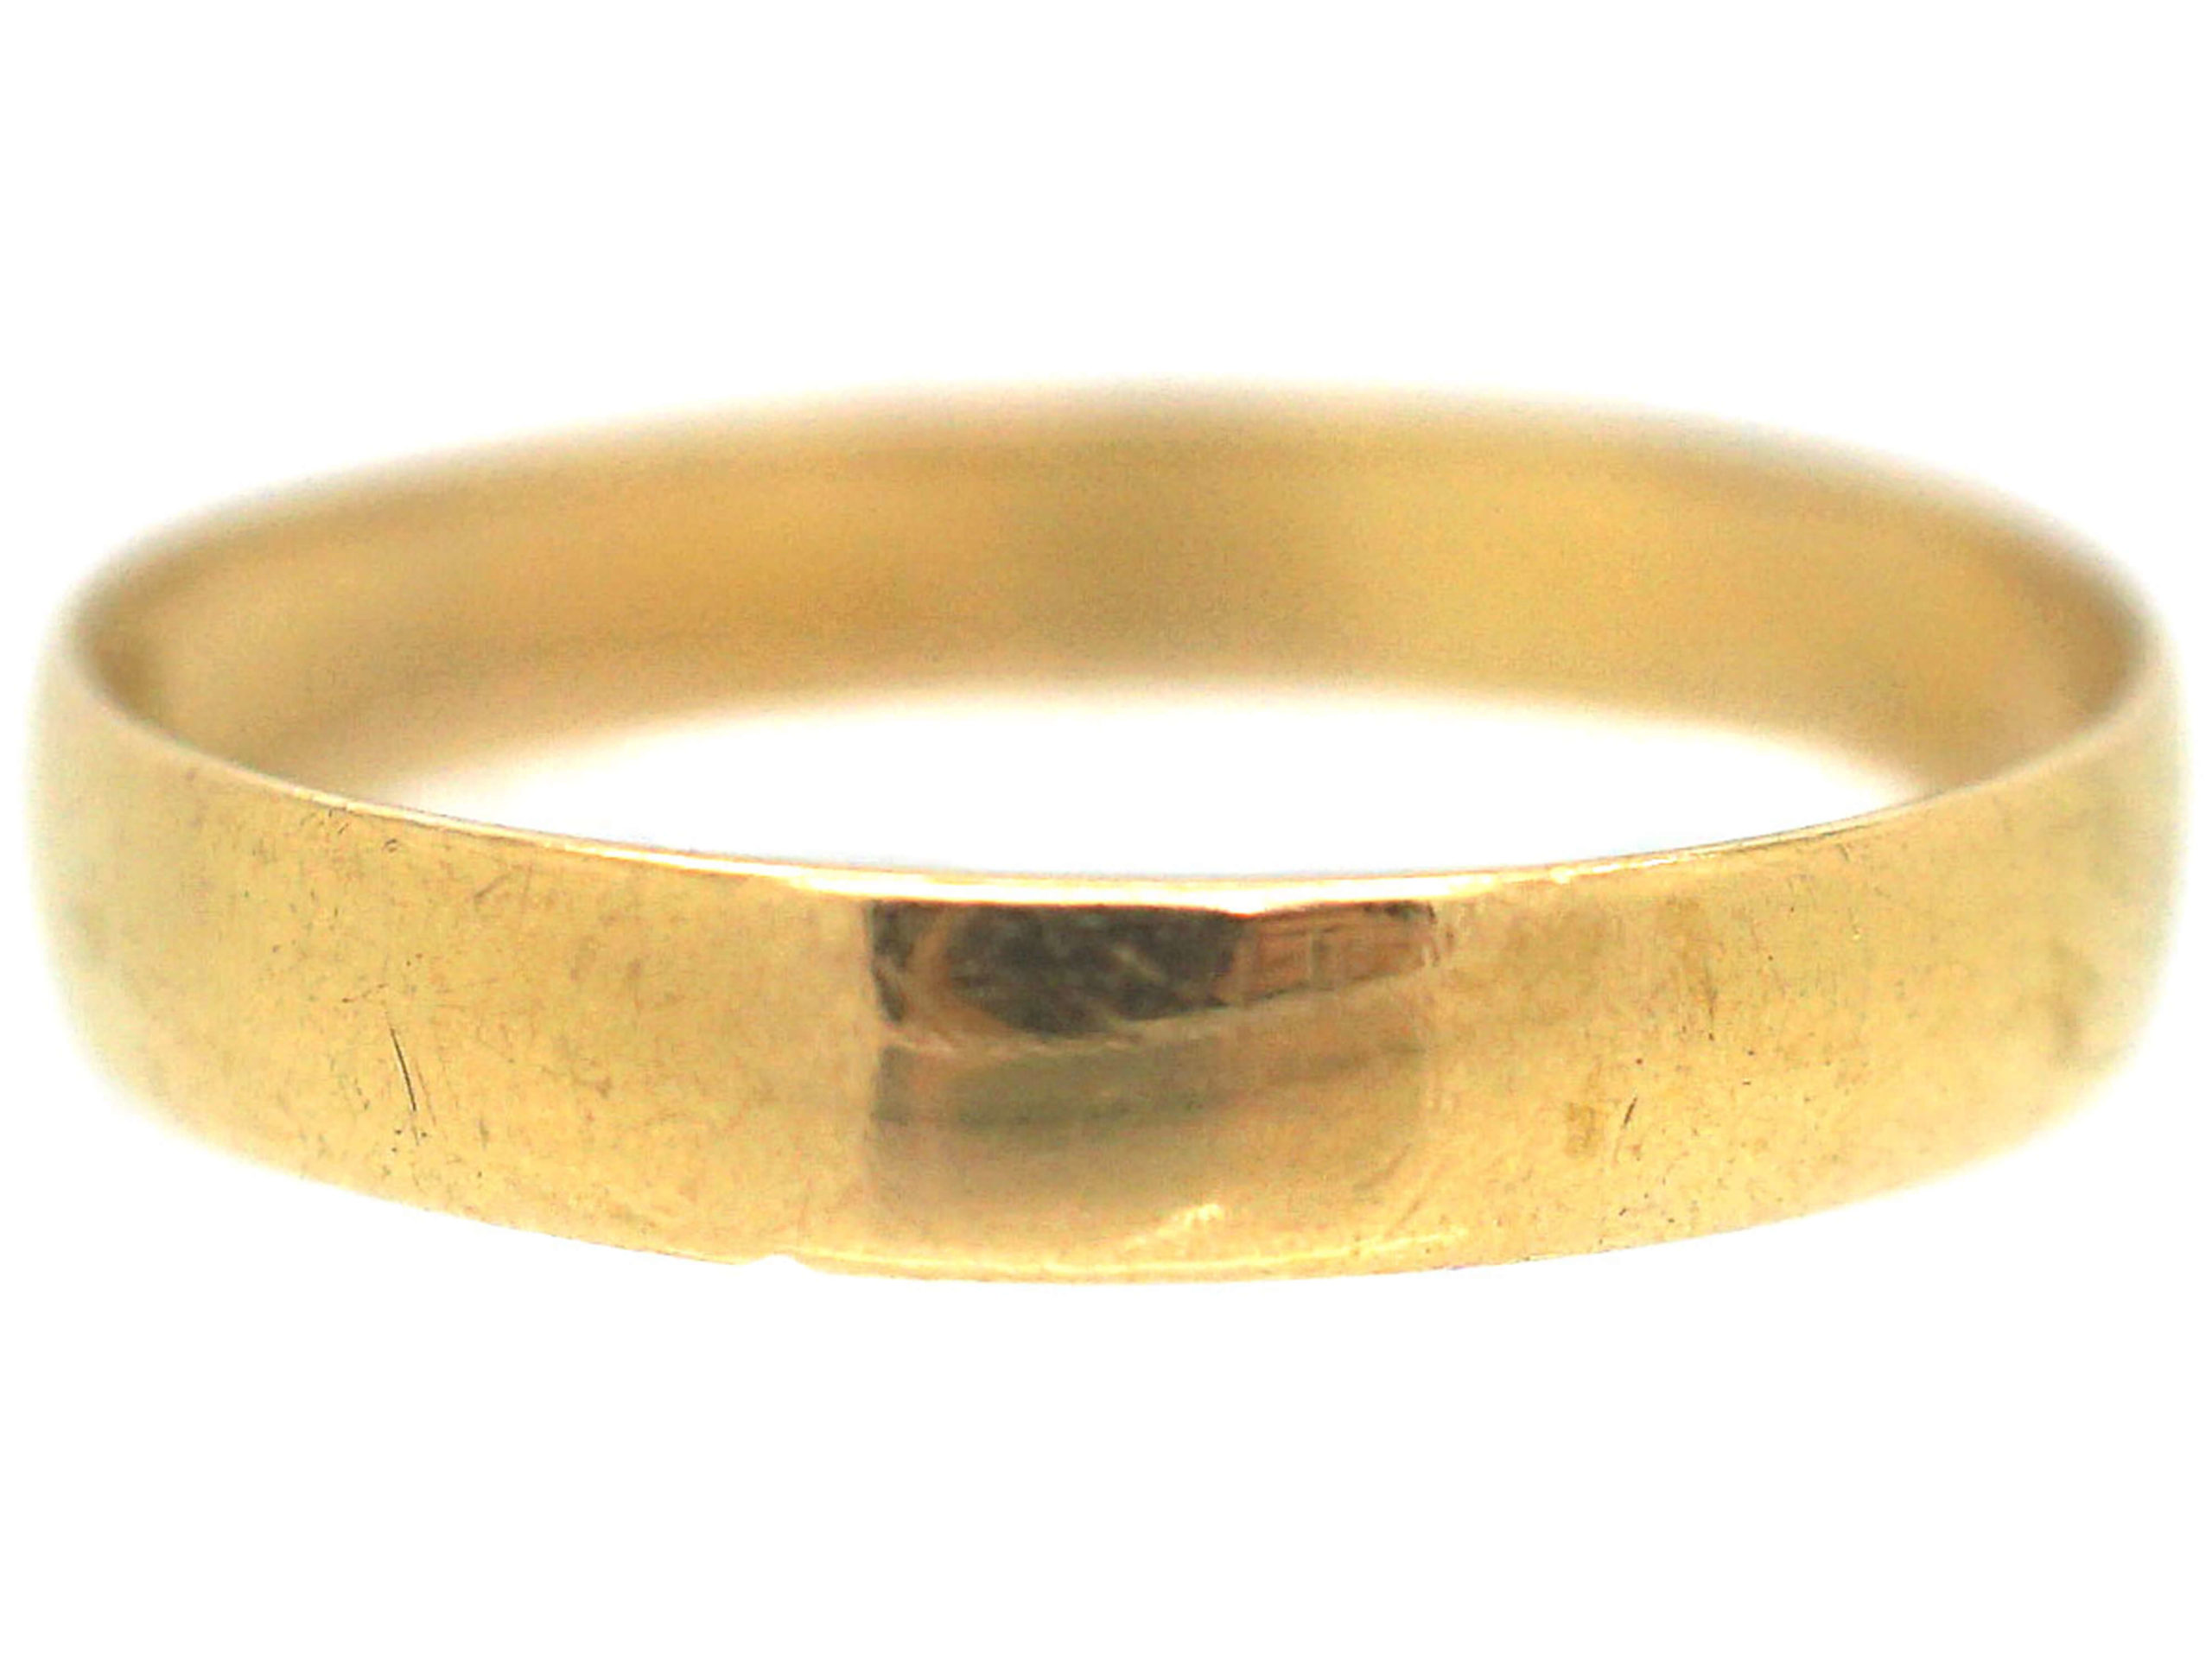 Victorian 22ct Gold Wedding Ring made in 1889 (613P) | The Antique ...